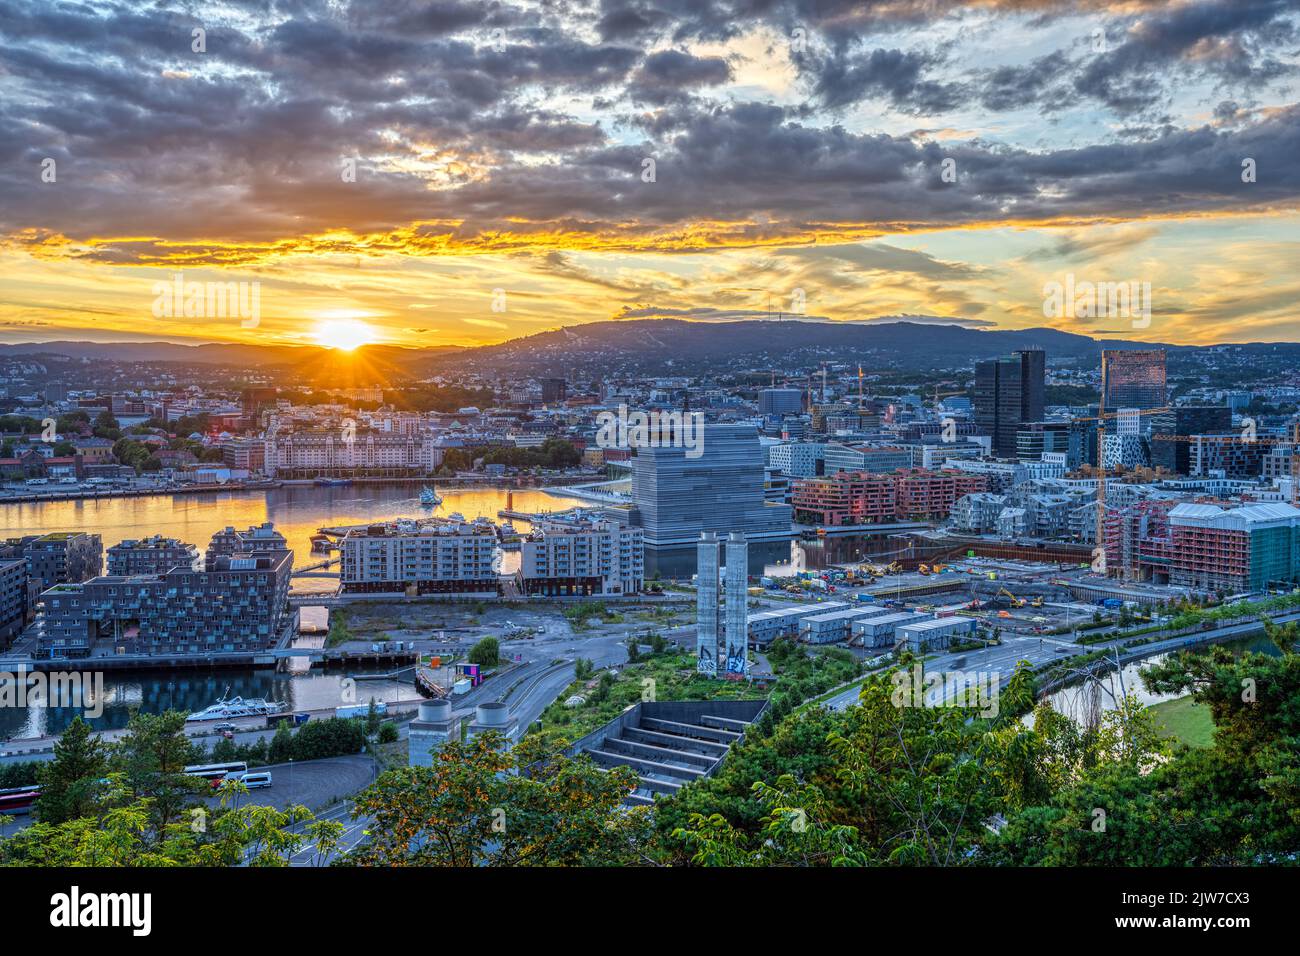 Beautiful sunset seen in Oslo, the capital of Norway Stock Photo